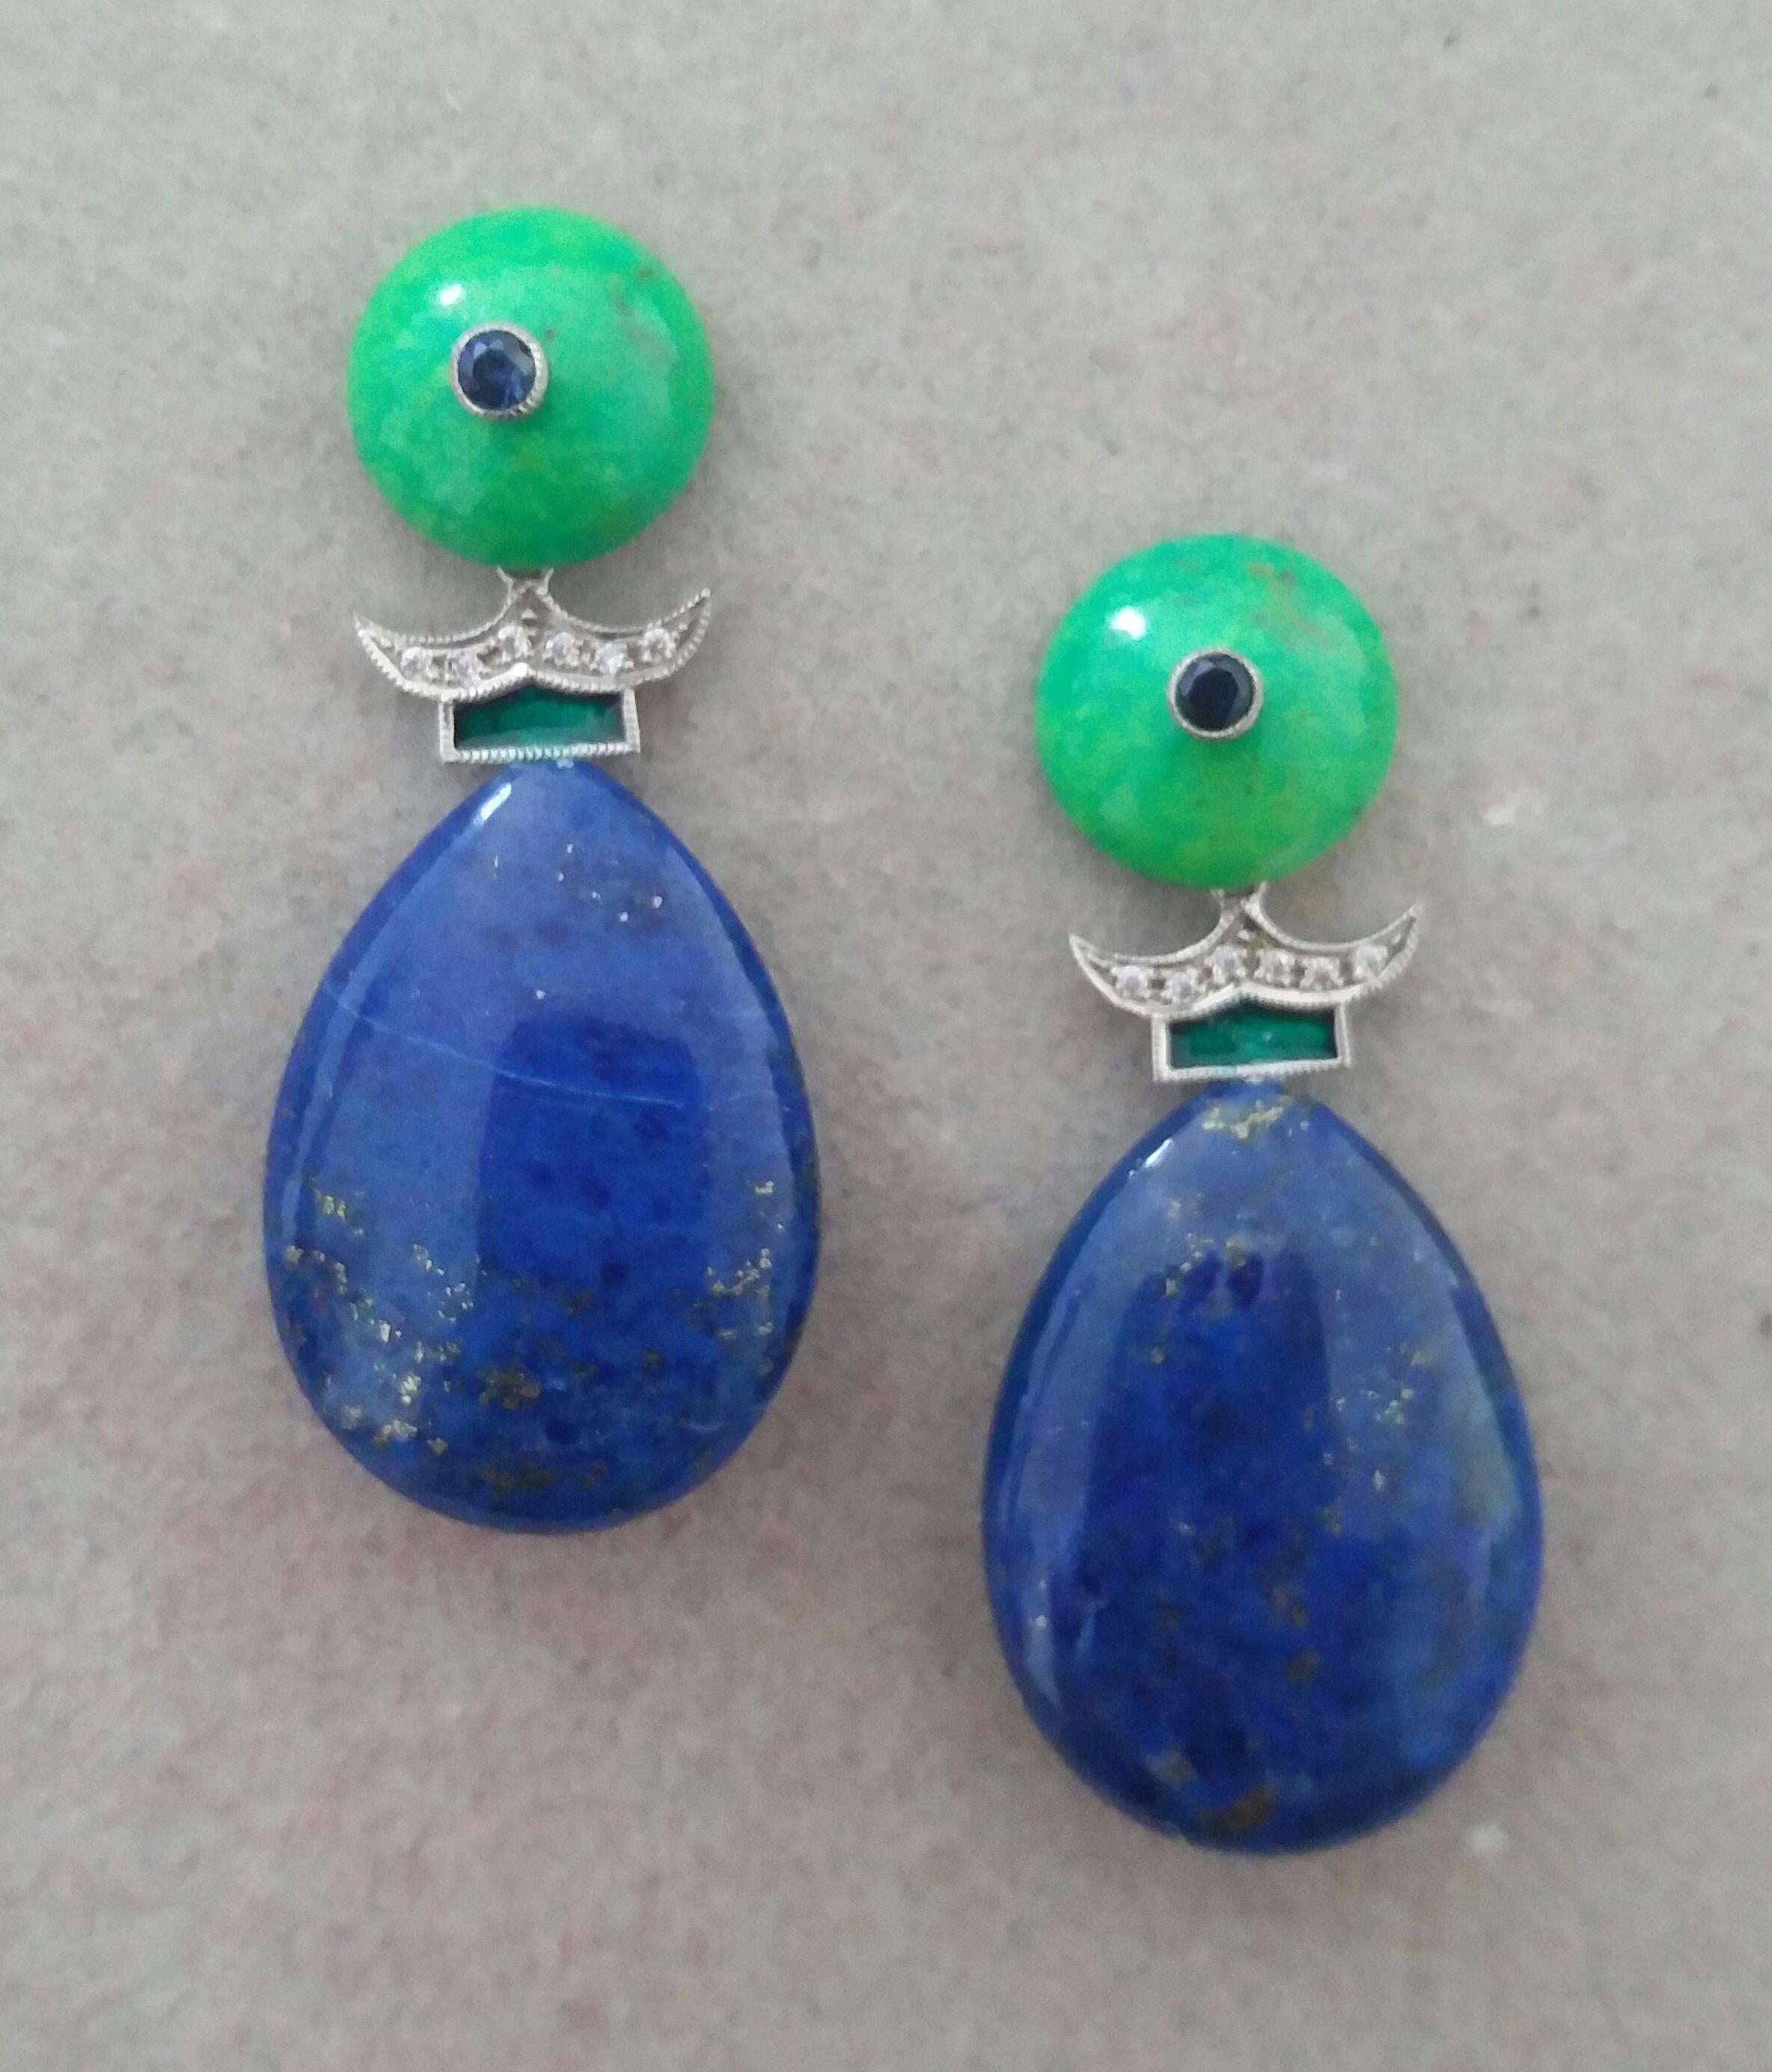 In these unique art deco style earrings we have the upper parts composed by 2 Turkmenistan Green Turquoise round buttons 12 mm in diameter with small round Blue Sapphires in the center, the central parts are composed by a pair of 14 kt gold elements